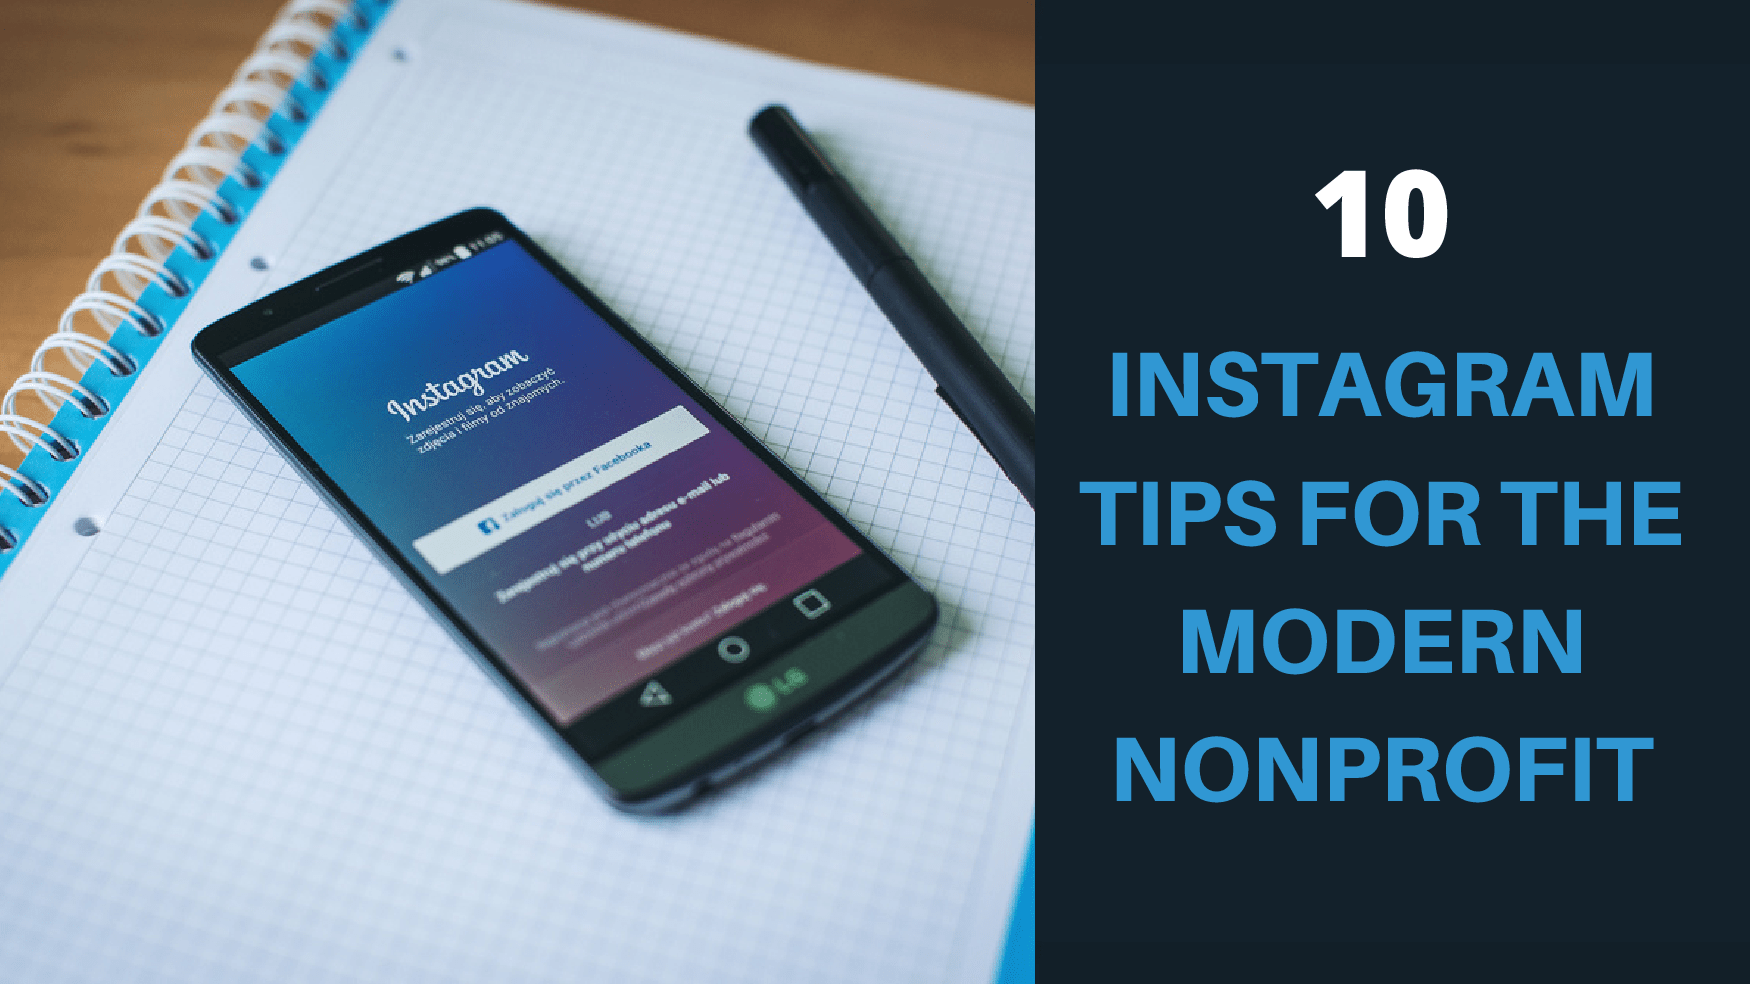 How to use Instagram for nonprofits